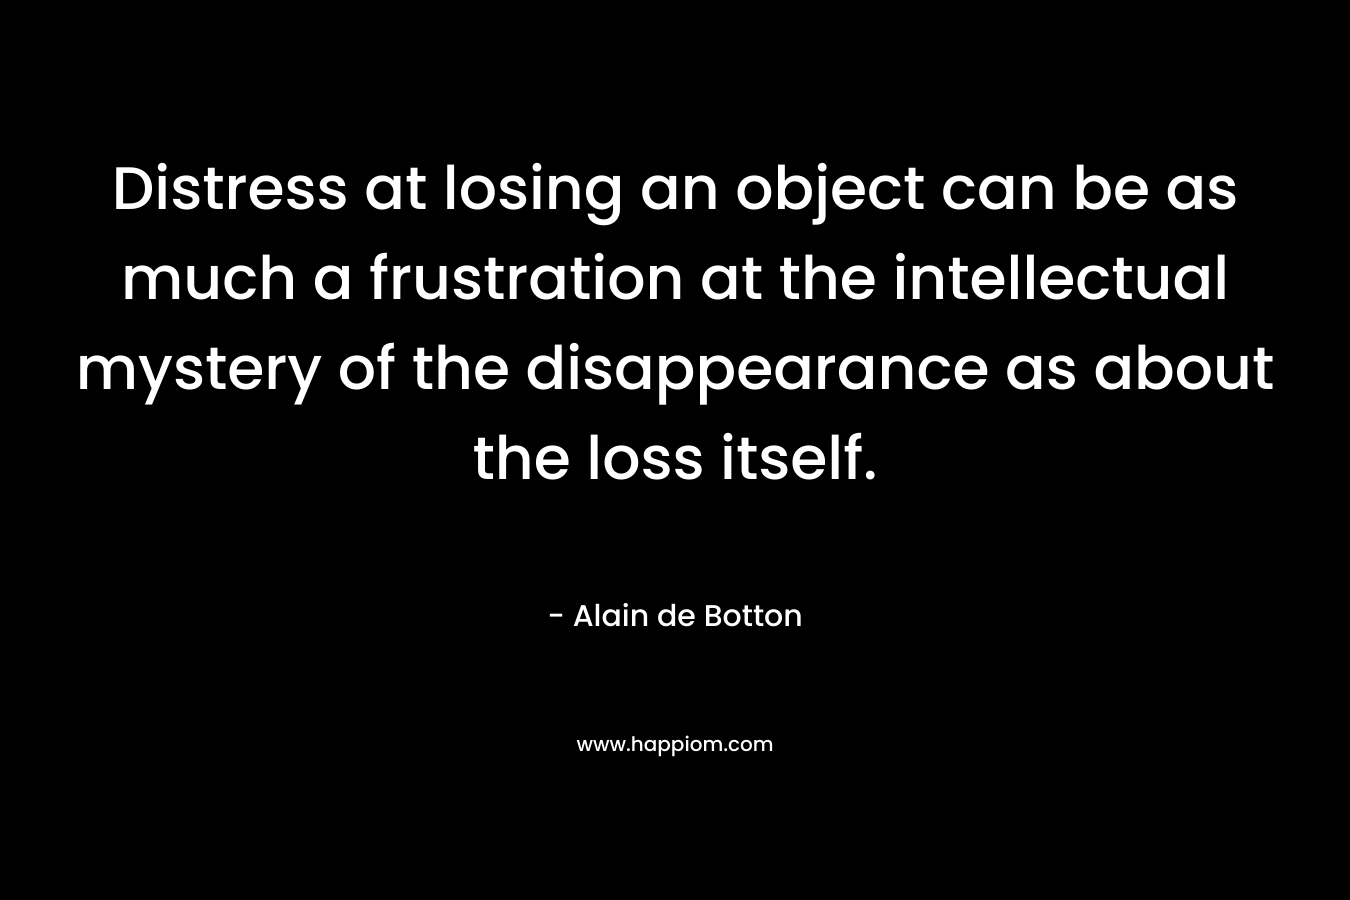 Distress at losing an object can be as much a frustration at the intellectual mystery of the disappearance as about the loss itself.